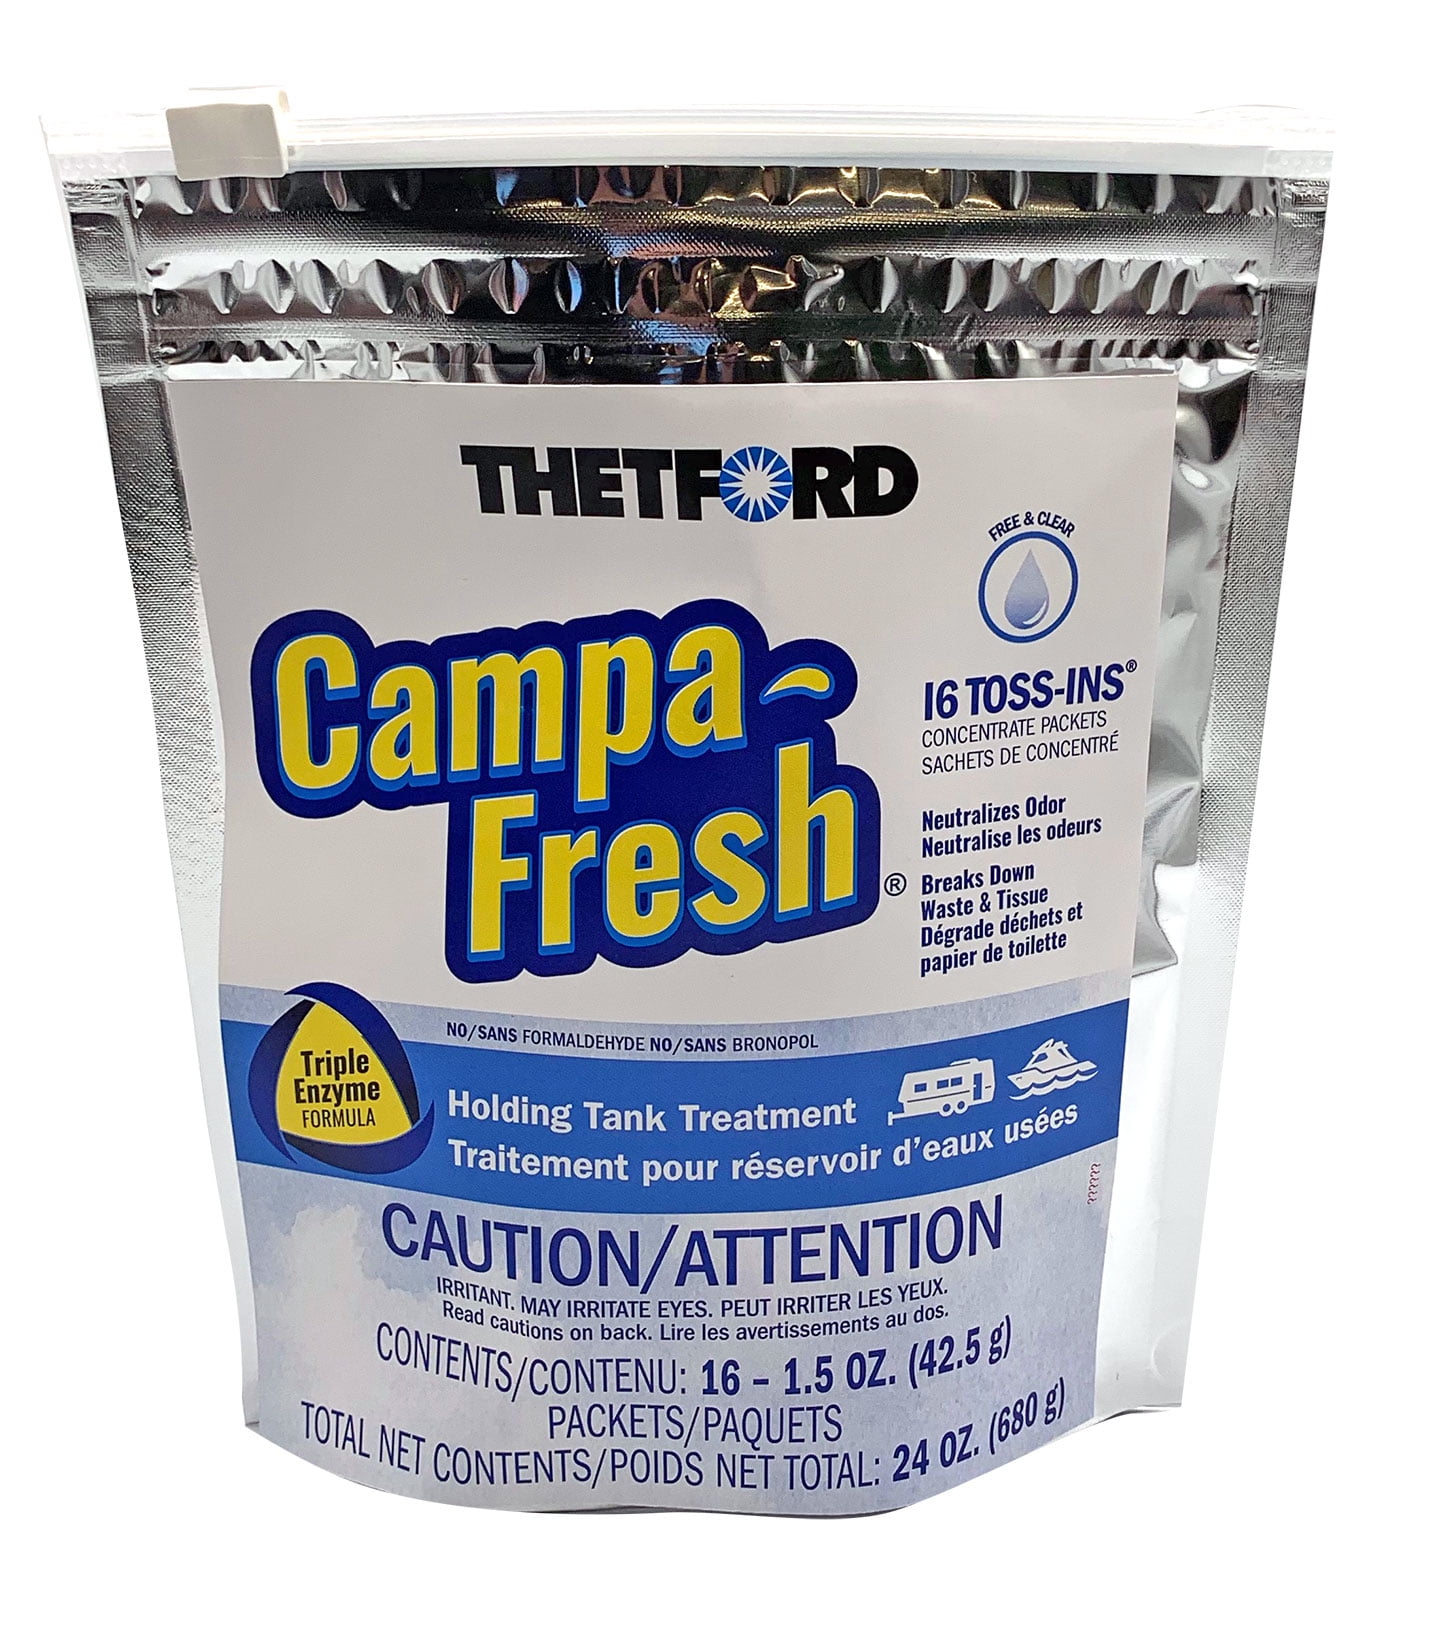 Thetford Campa-Fresh Free and Clear Toss-Ins Holding Tank Treatment, 16 Count